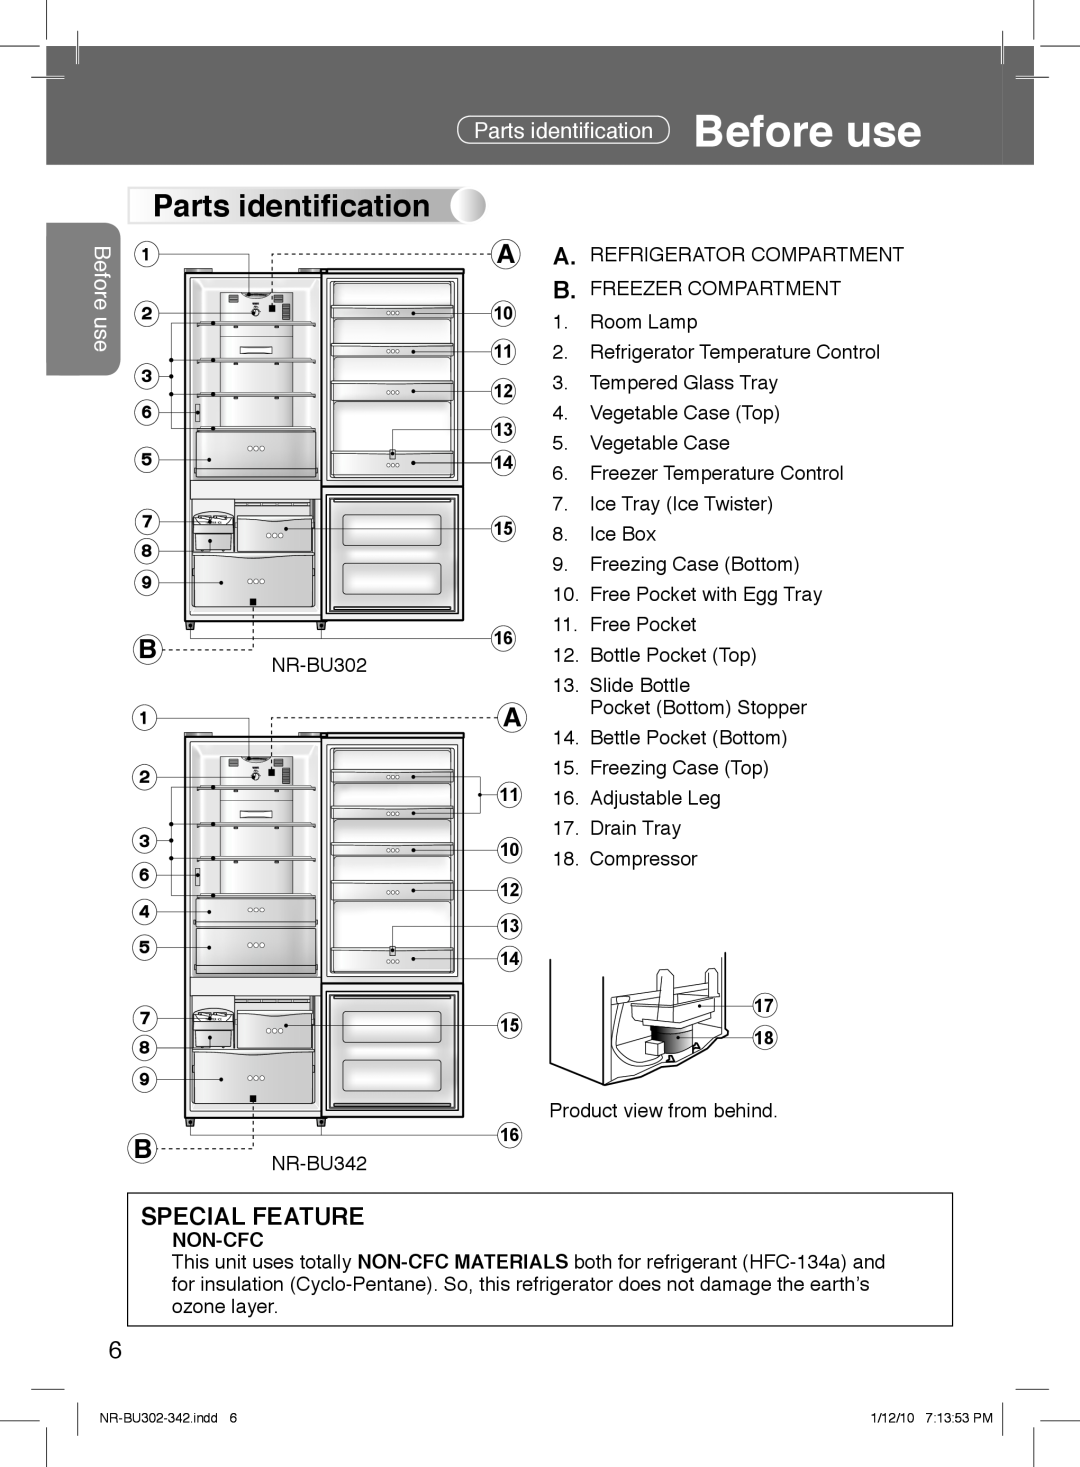 Panasonic NR-BU302, NR-BU342 manual Special Feature, Parts identiﬁcation Before use 